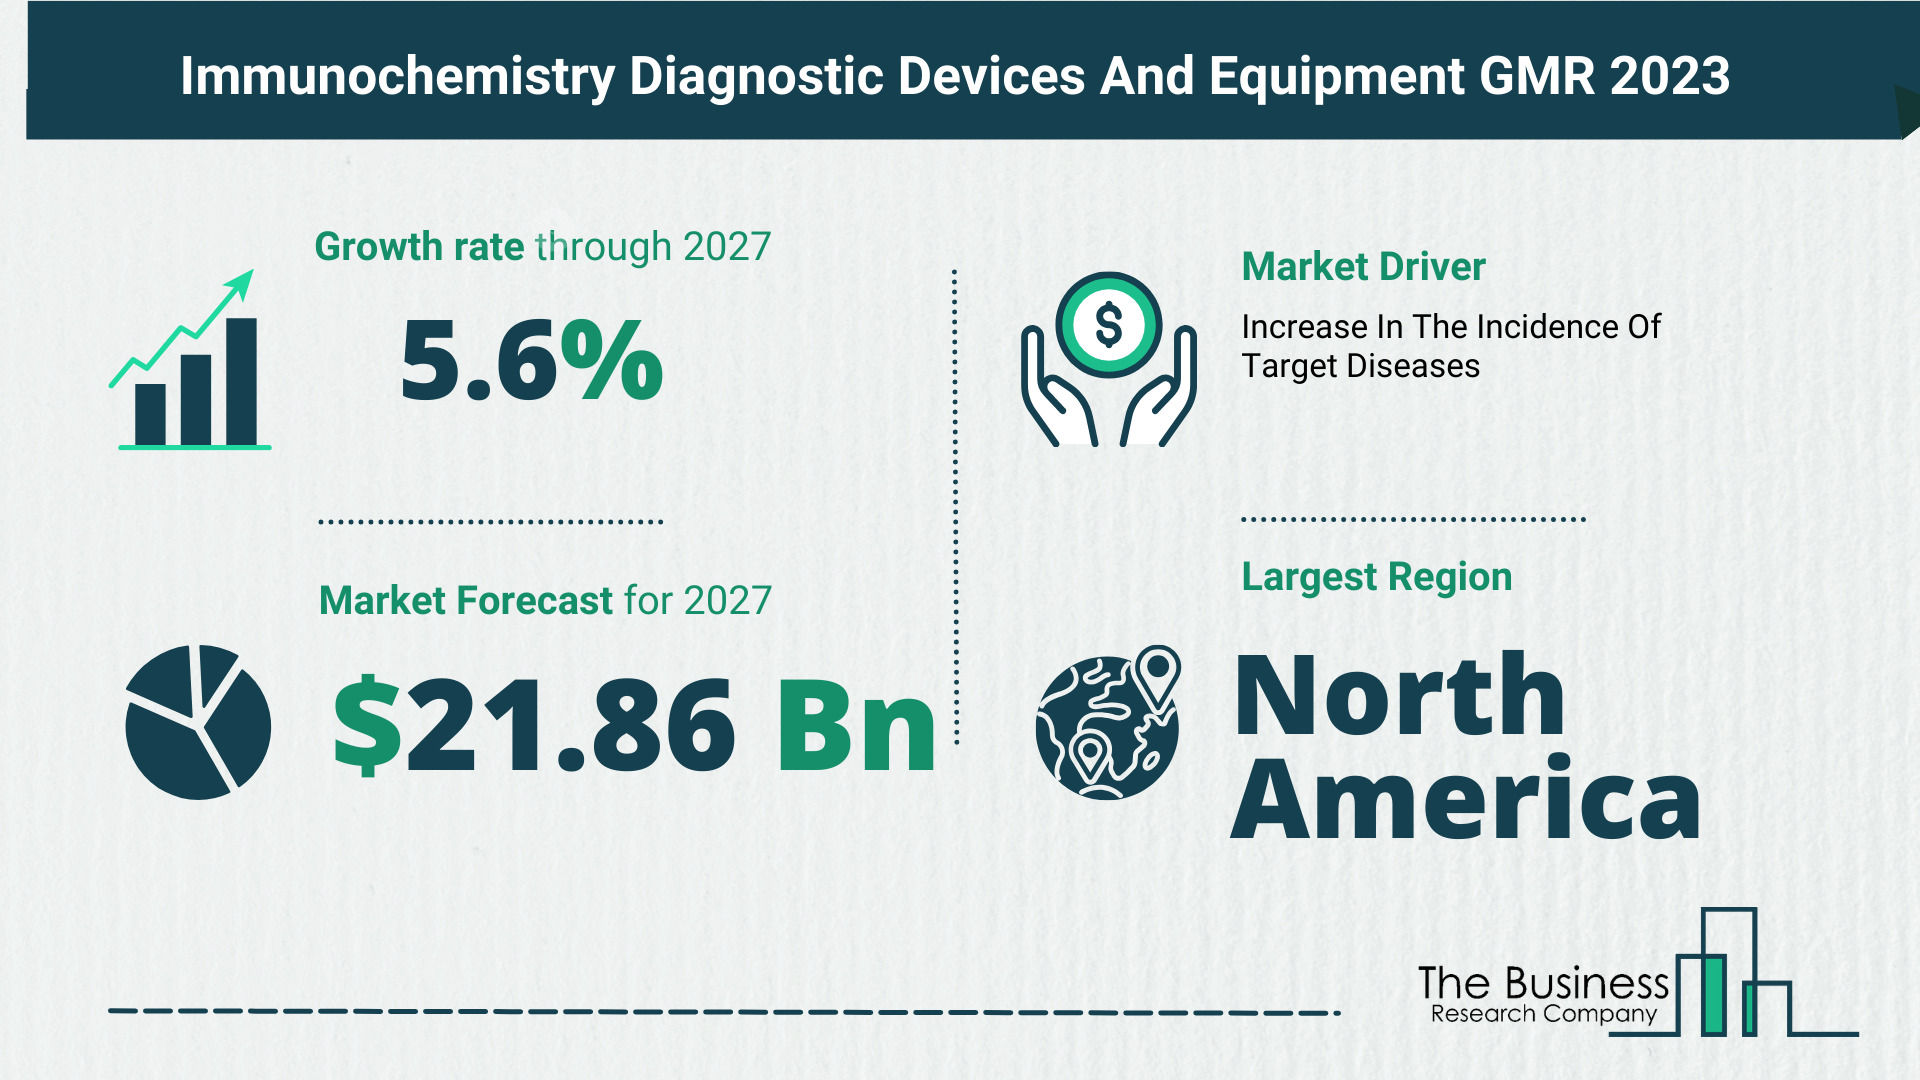 Overview Of The Immunochemistry Diagnostic Devices And Equipment Market 2023: Size, Drivers, And Trends